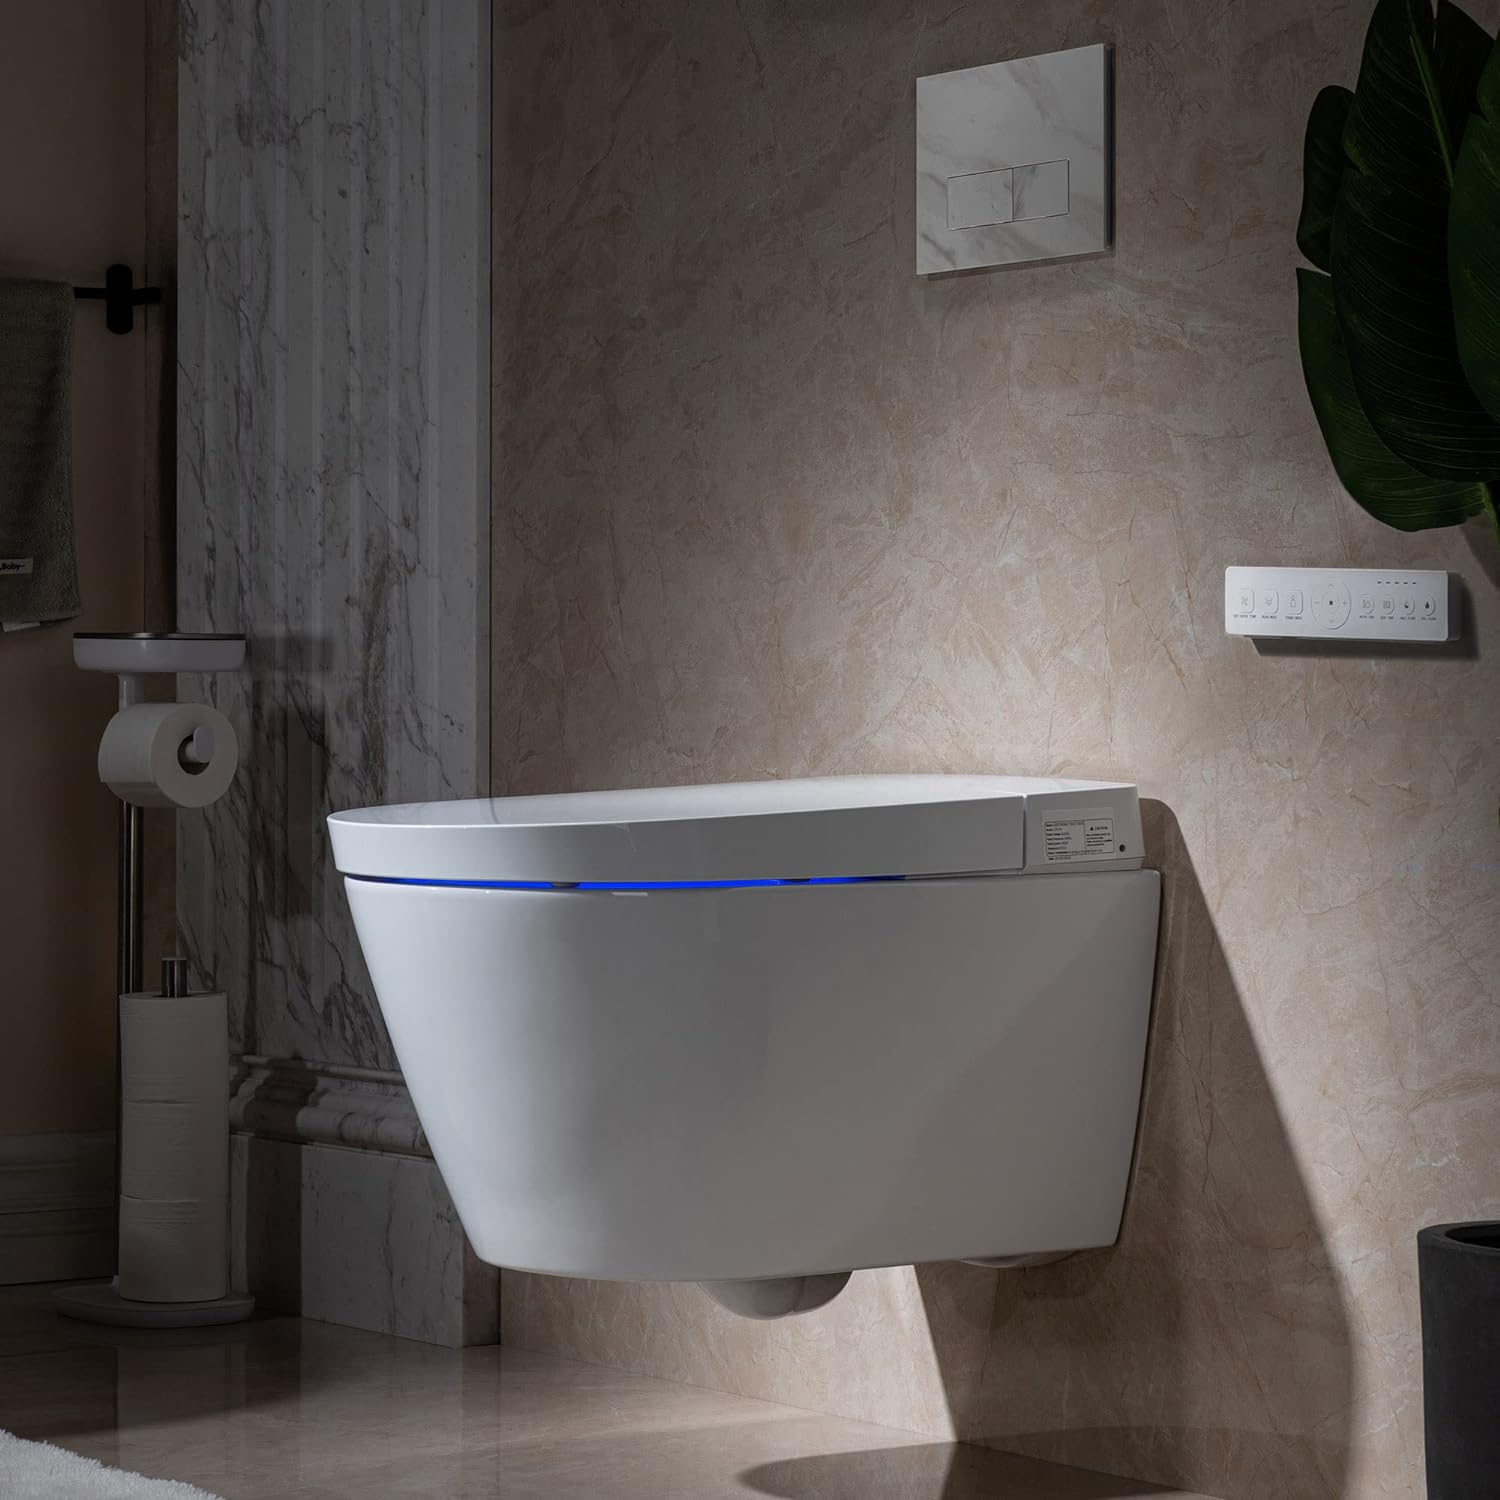 Compact Elongated Dual-flush wall hung toilet with Bidet Wash Function, Heated Seat & Dryer. Matching Concealed Tank system and White Marble Stone Slim Flush Plates Included.